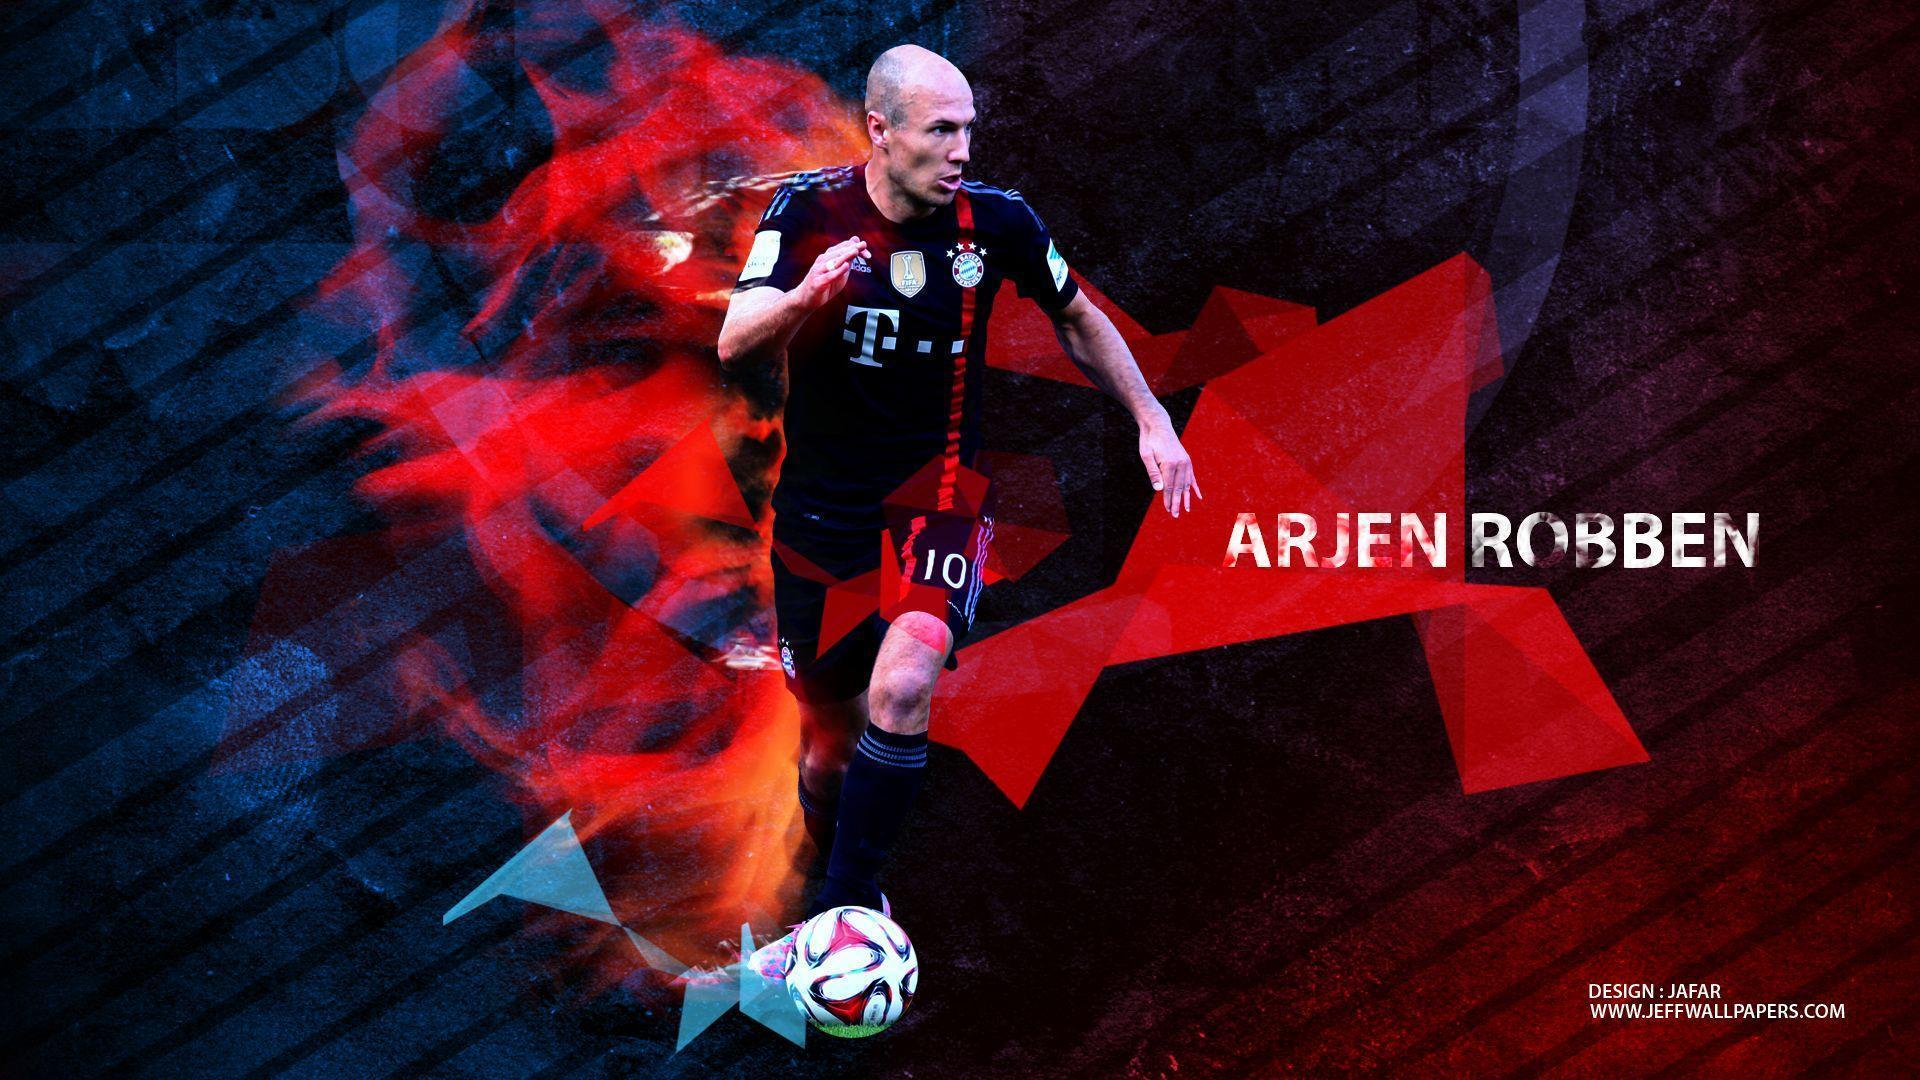 Arjen Robben Wallpaper High Resolution and Quality Download